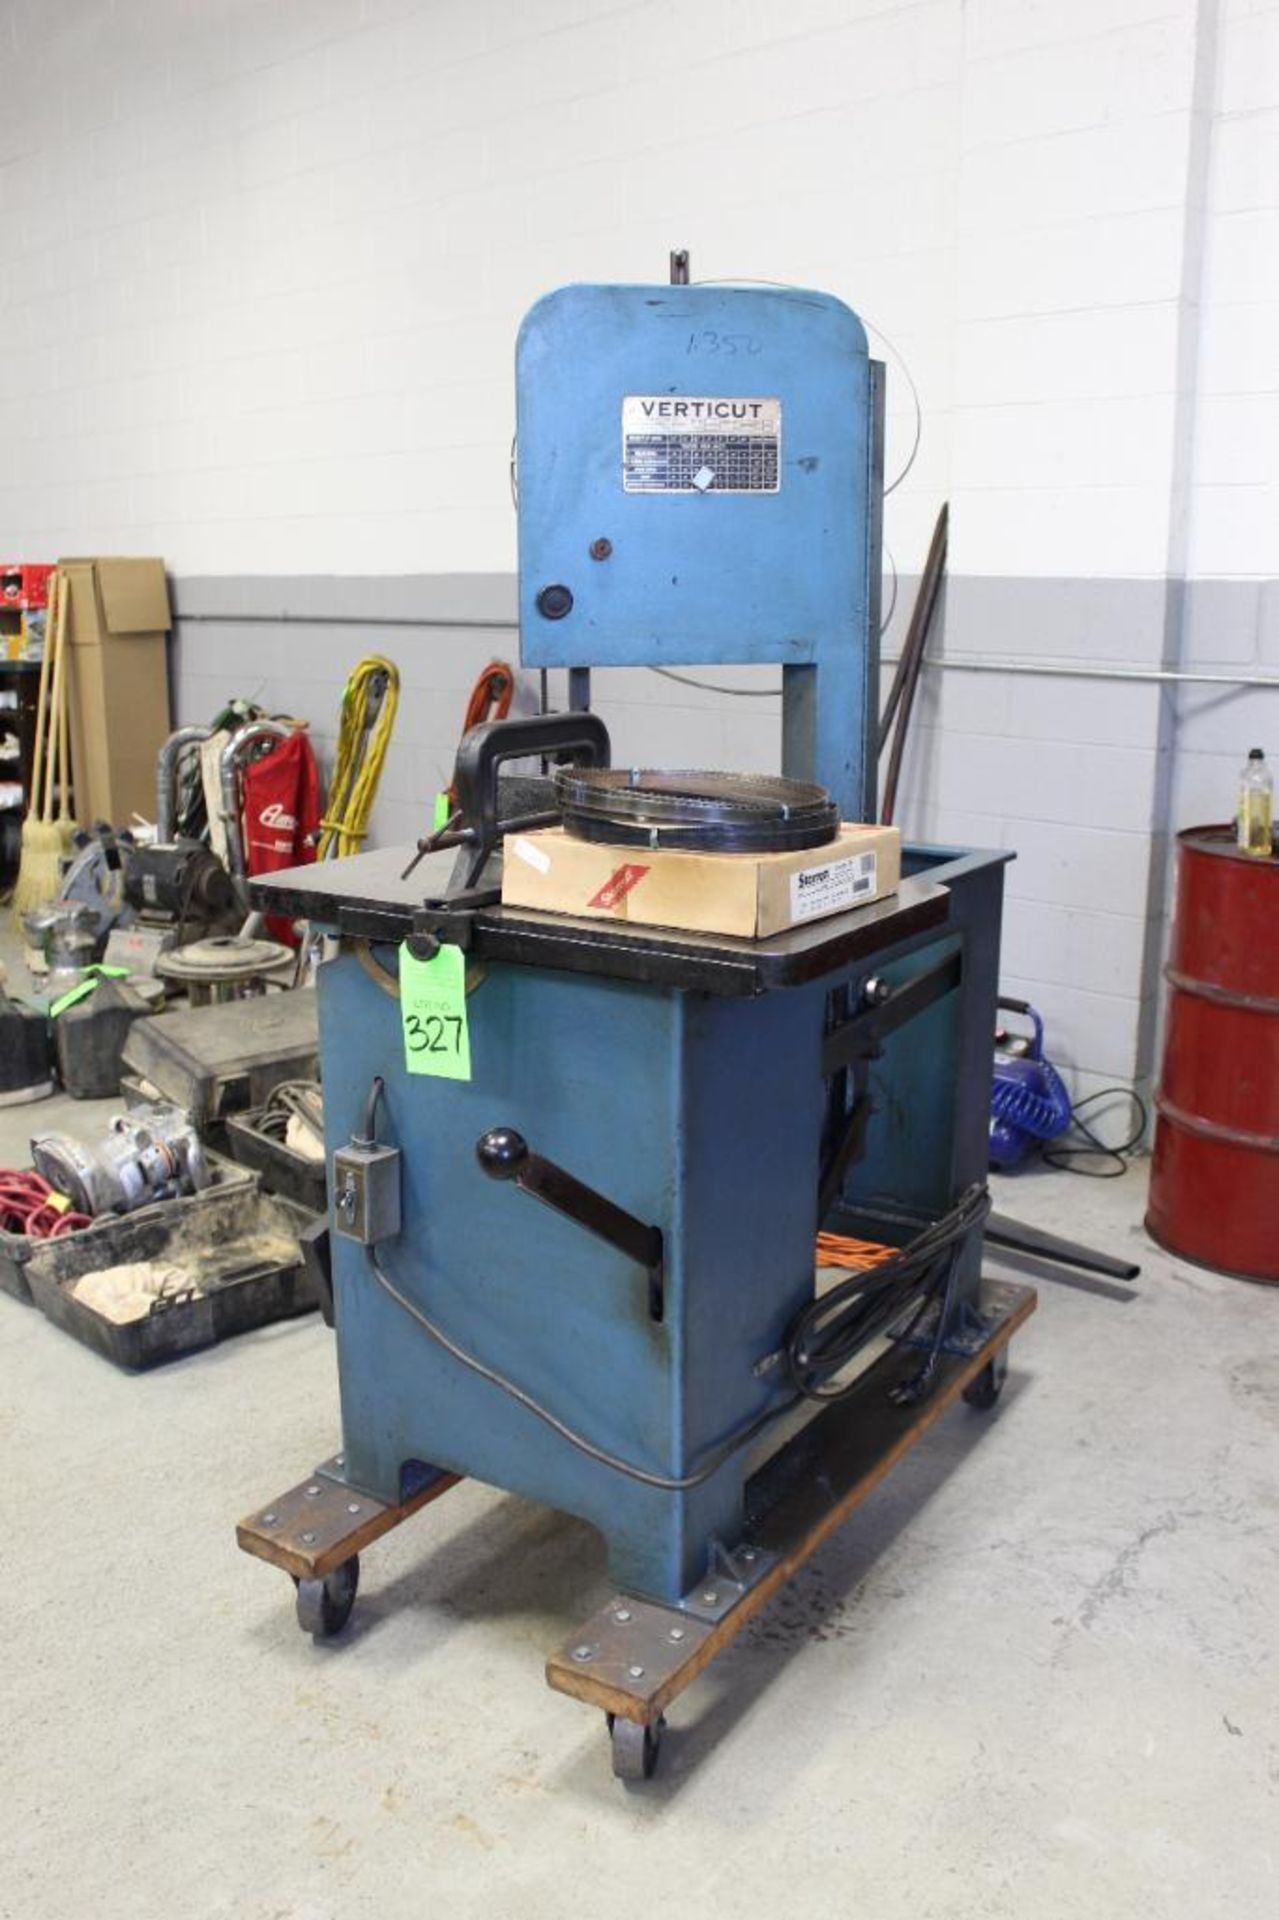 Verticut Model 114-A Vertical Band Saw on rolling base